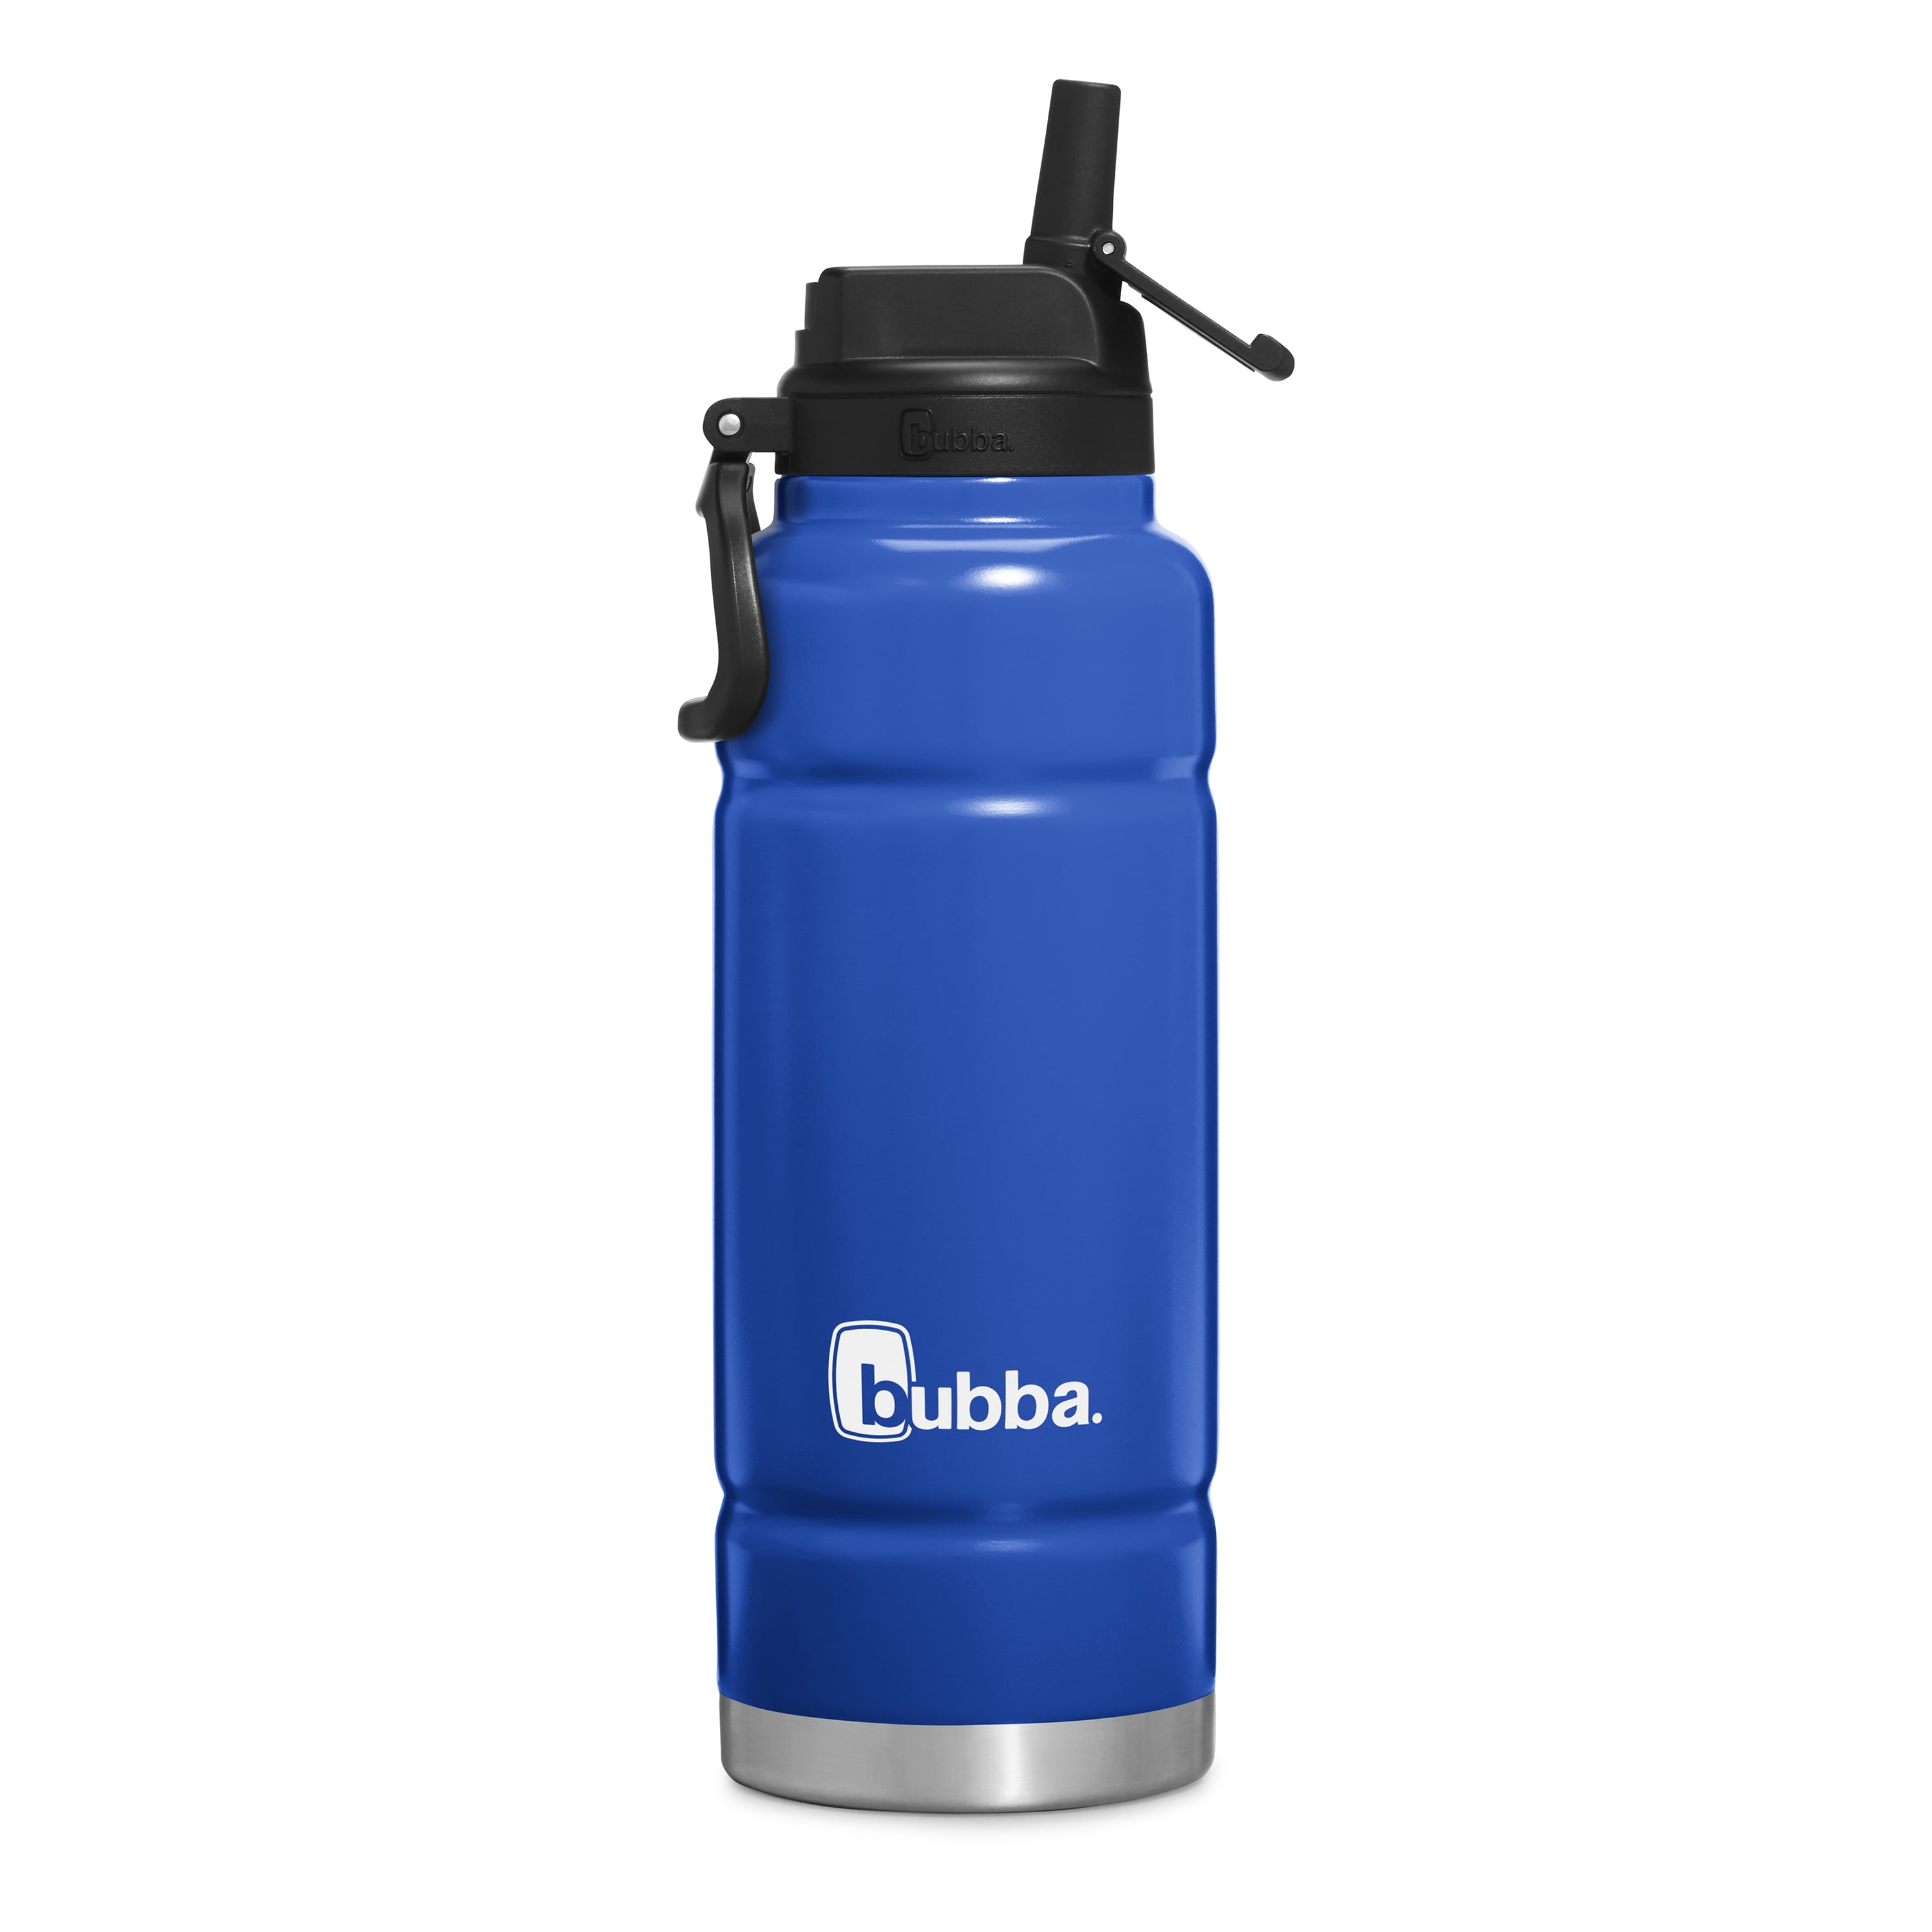 Bubba 40 Oz. Radiant Stainless Steel Rubberized Water Bottle, Electric  Berry, Water Bottles, Sports & Outdoors